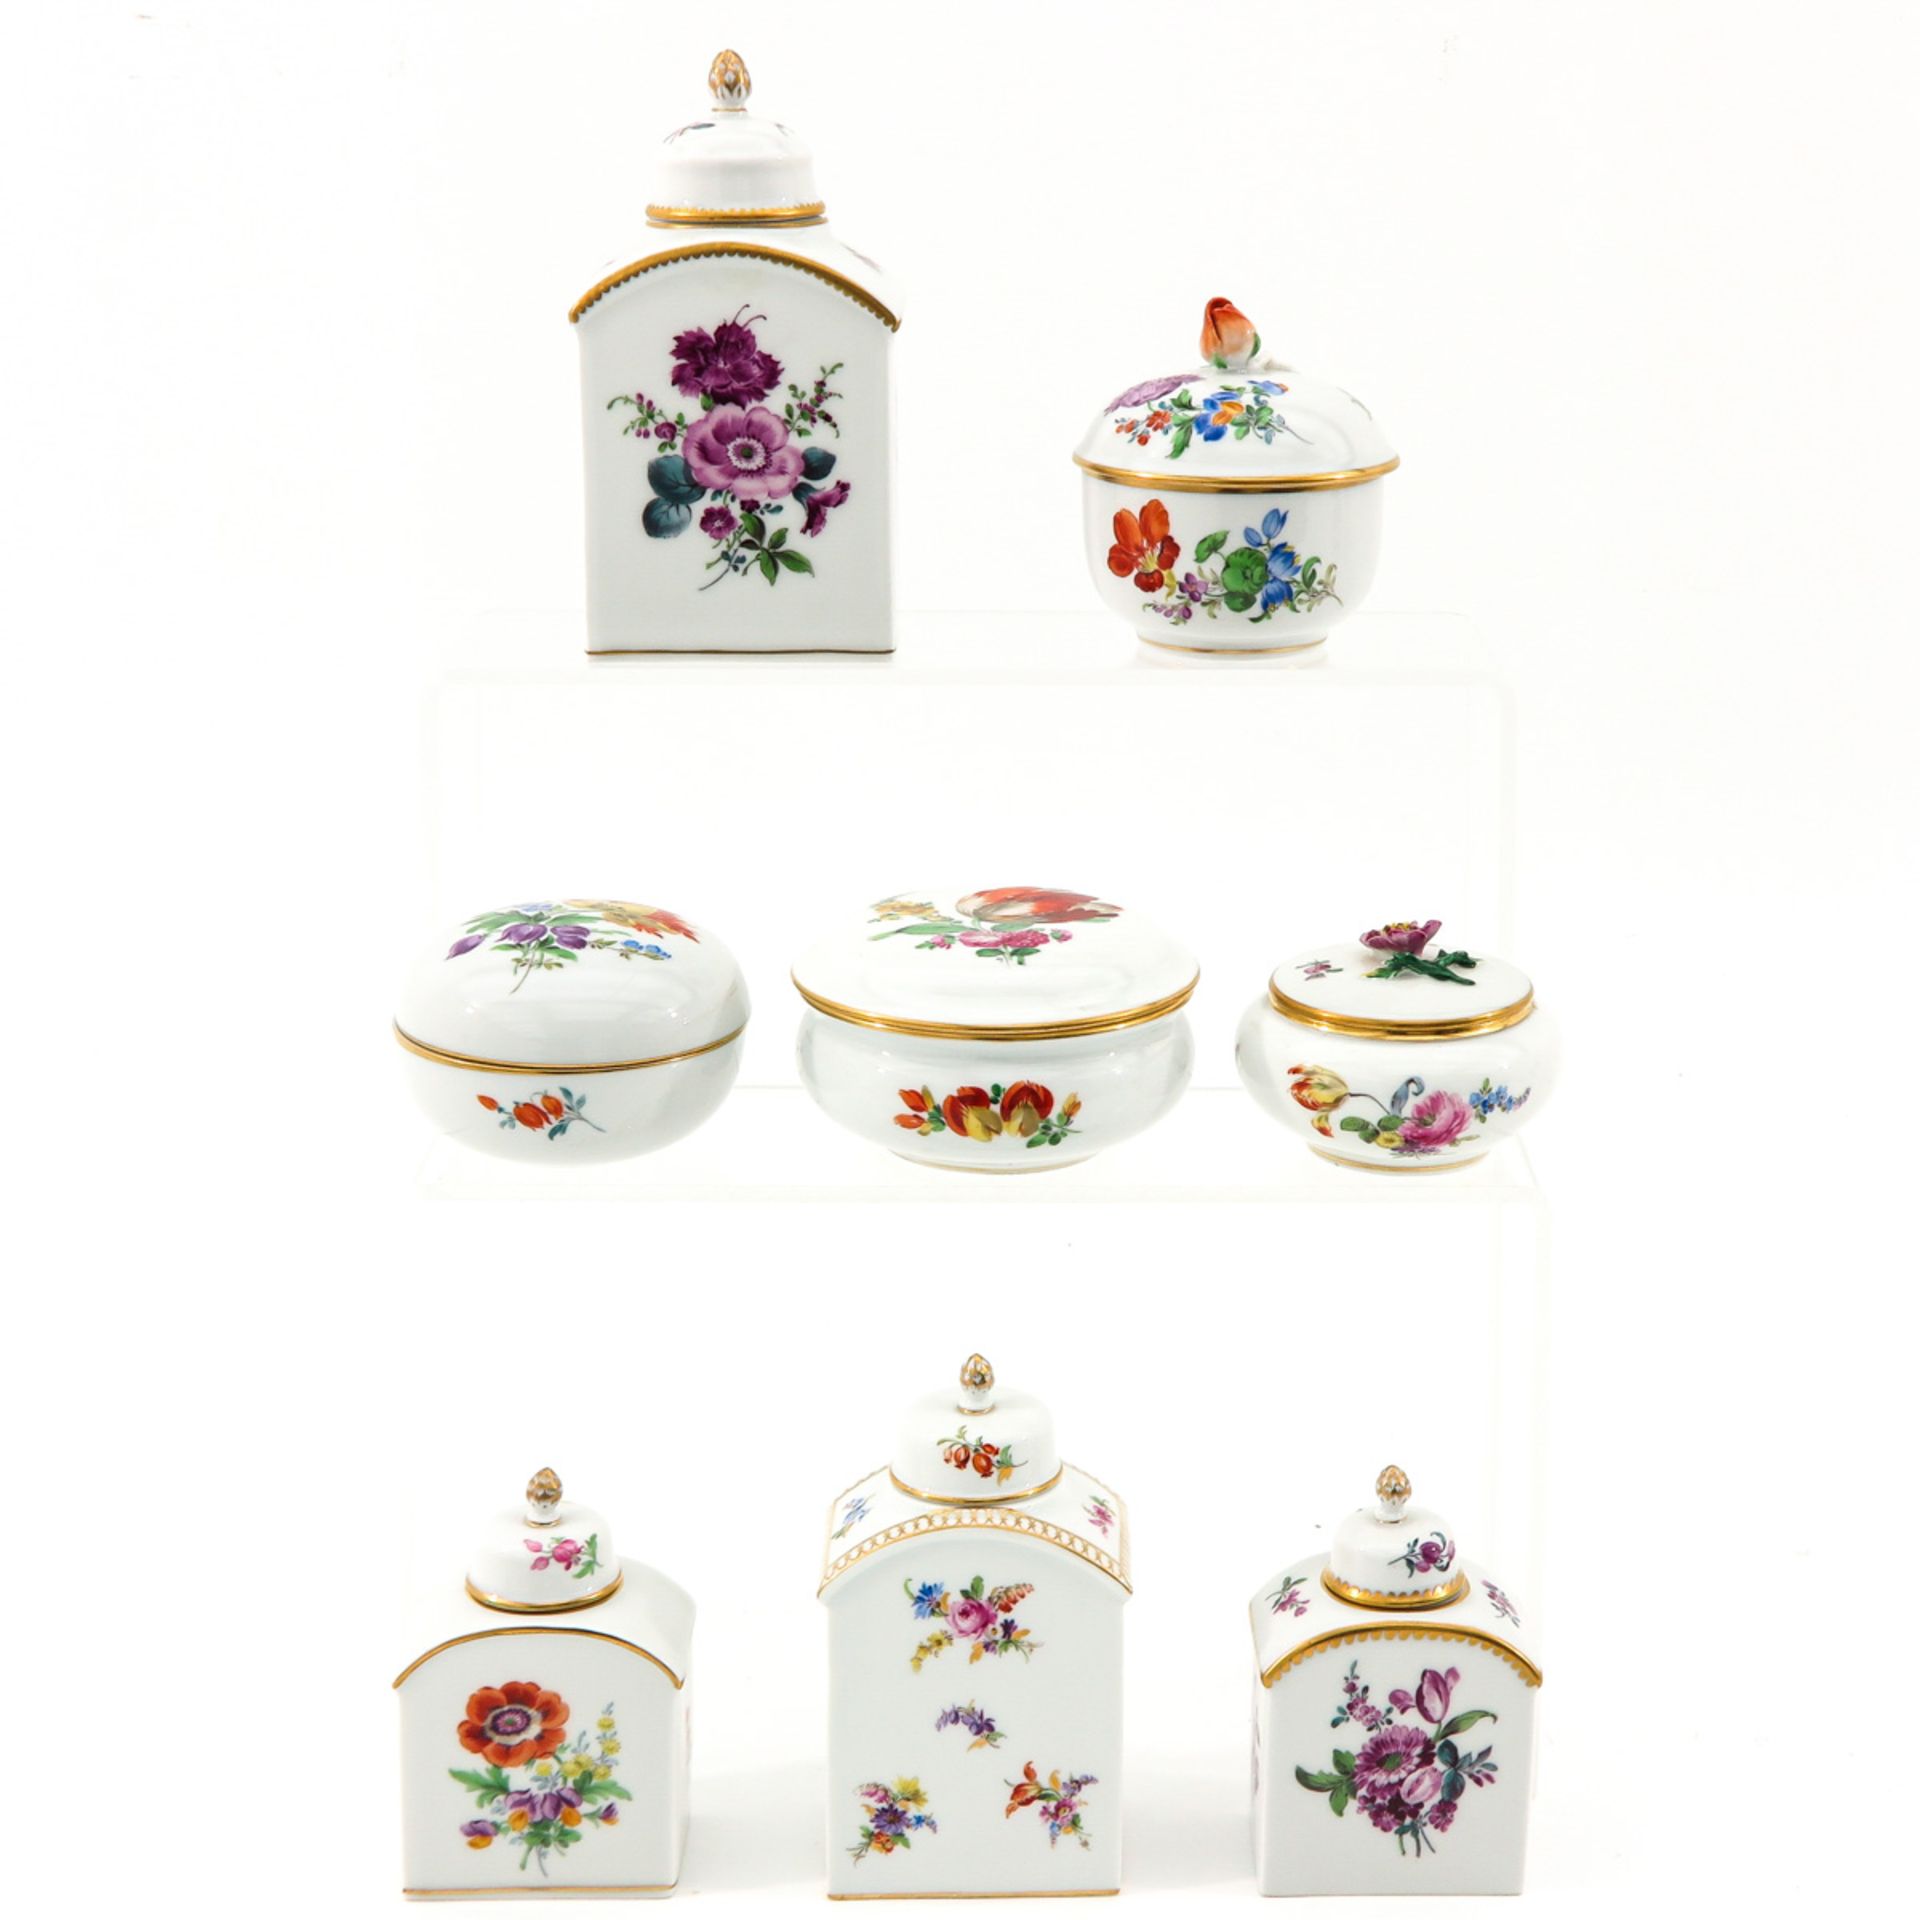 A Collection of Meissen Porcelain